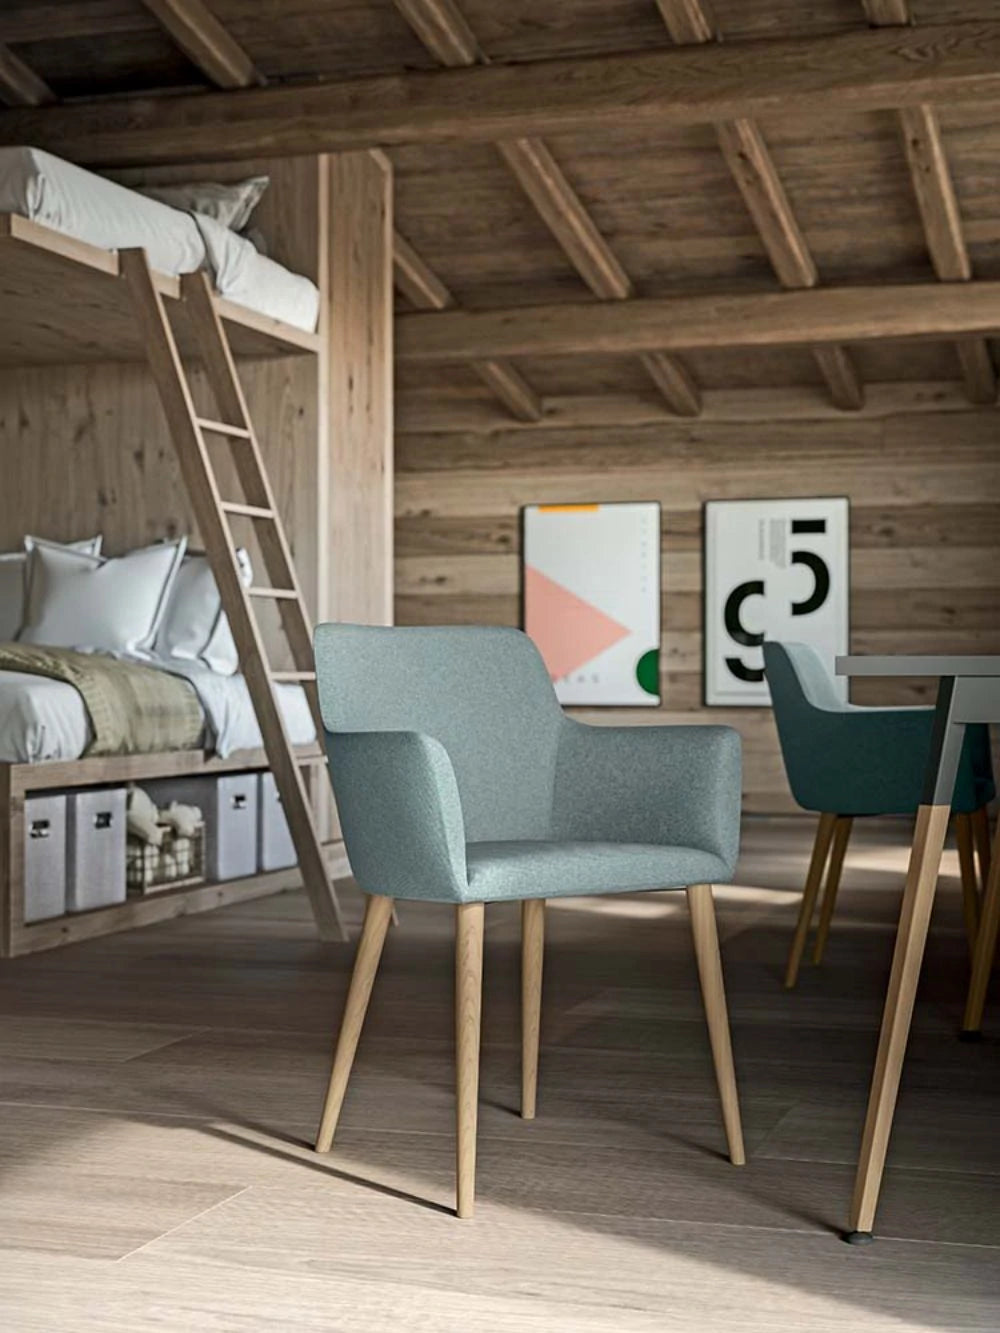 City Design Balance Dining Chair in Light Grey with Bunk Bed and Wooden Table in Bedroom Setting